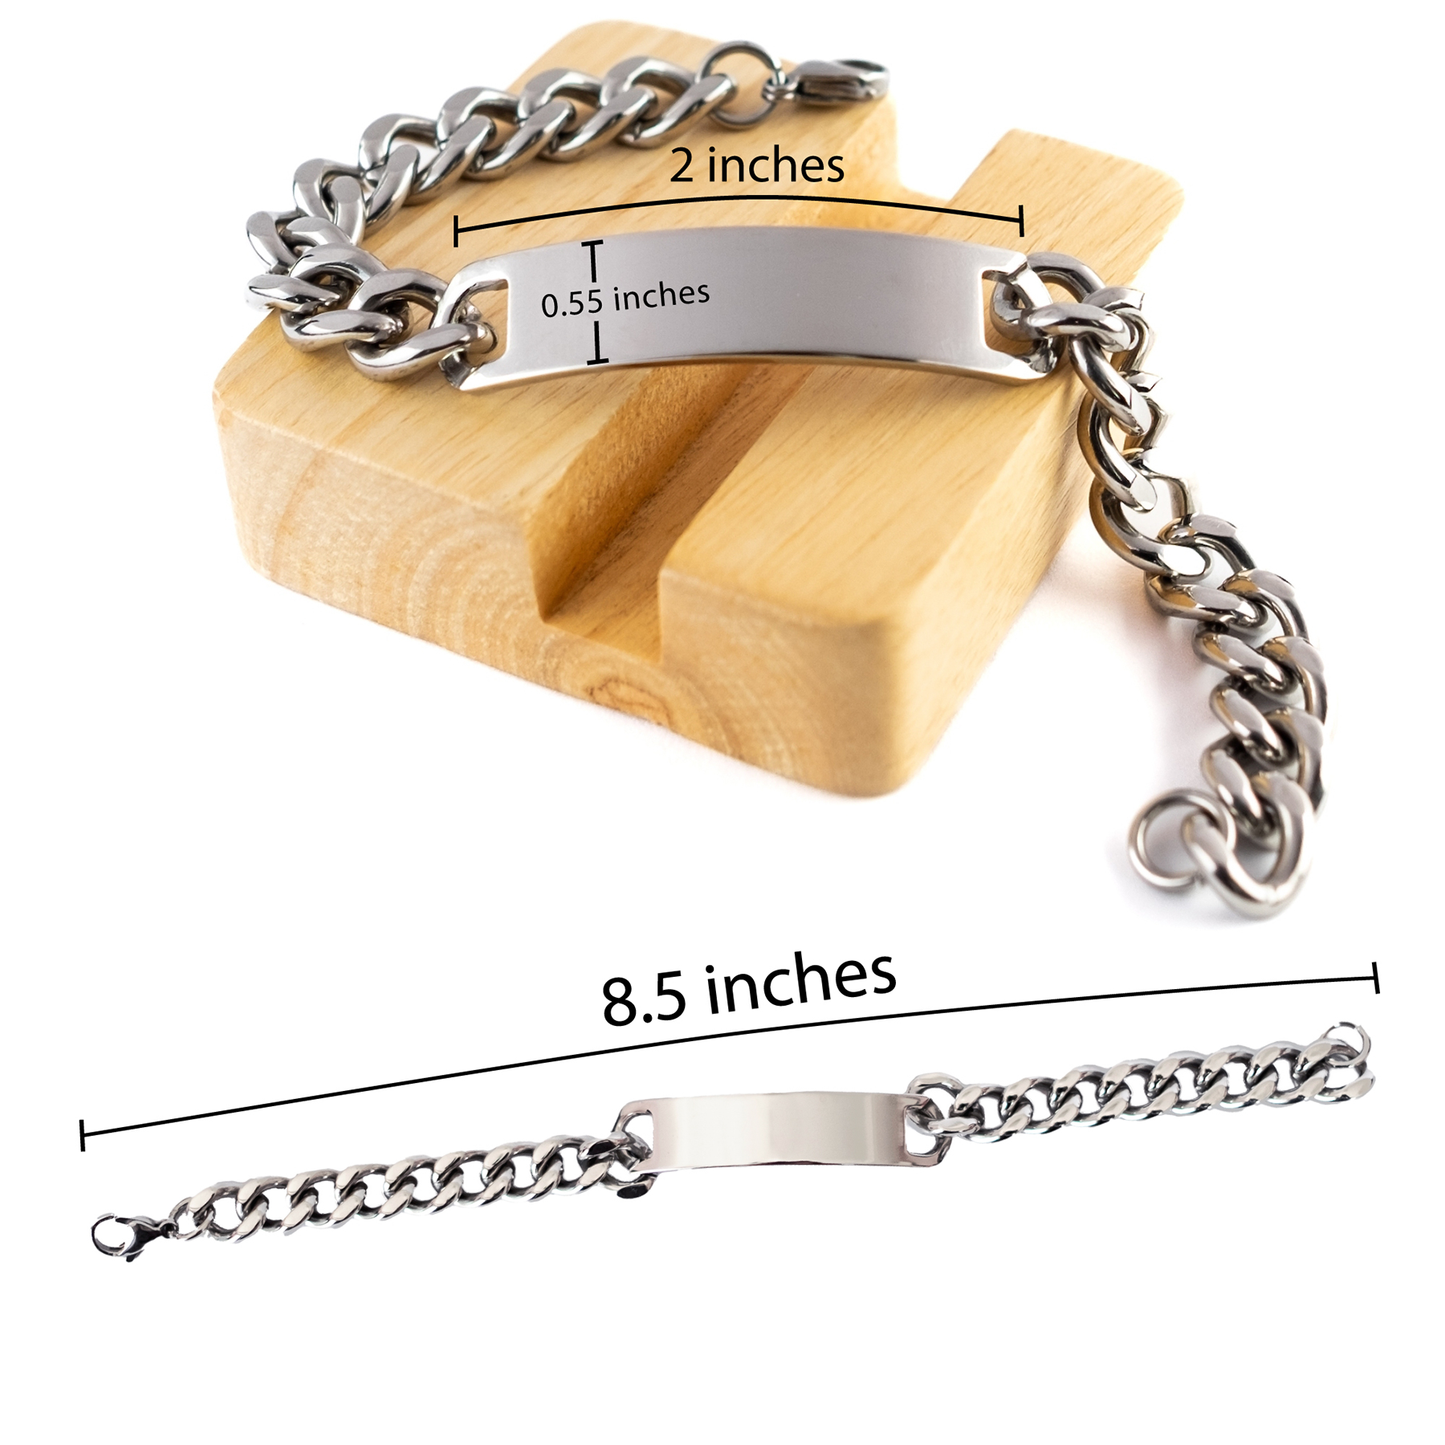 To My Fiance Thank You Gifts, You are appreciated more than you know, Appreciation Cuban Chain Stainless Steel Bracelet for Fiance, Birthday Unique Gifts for Fiance